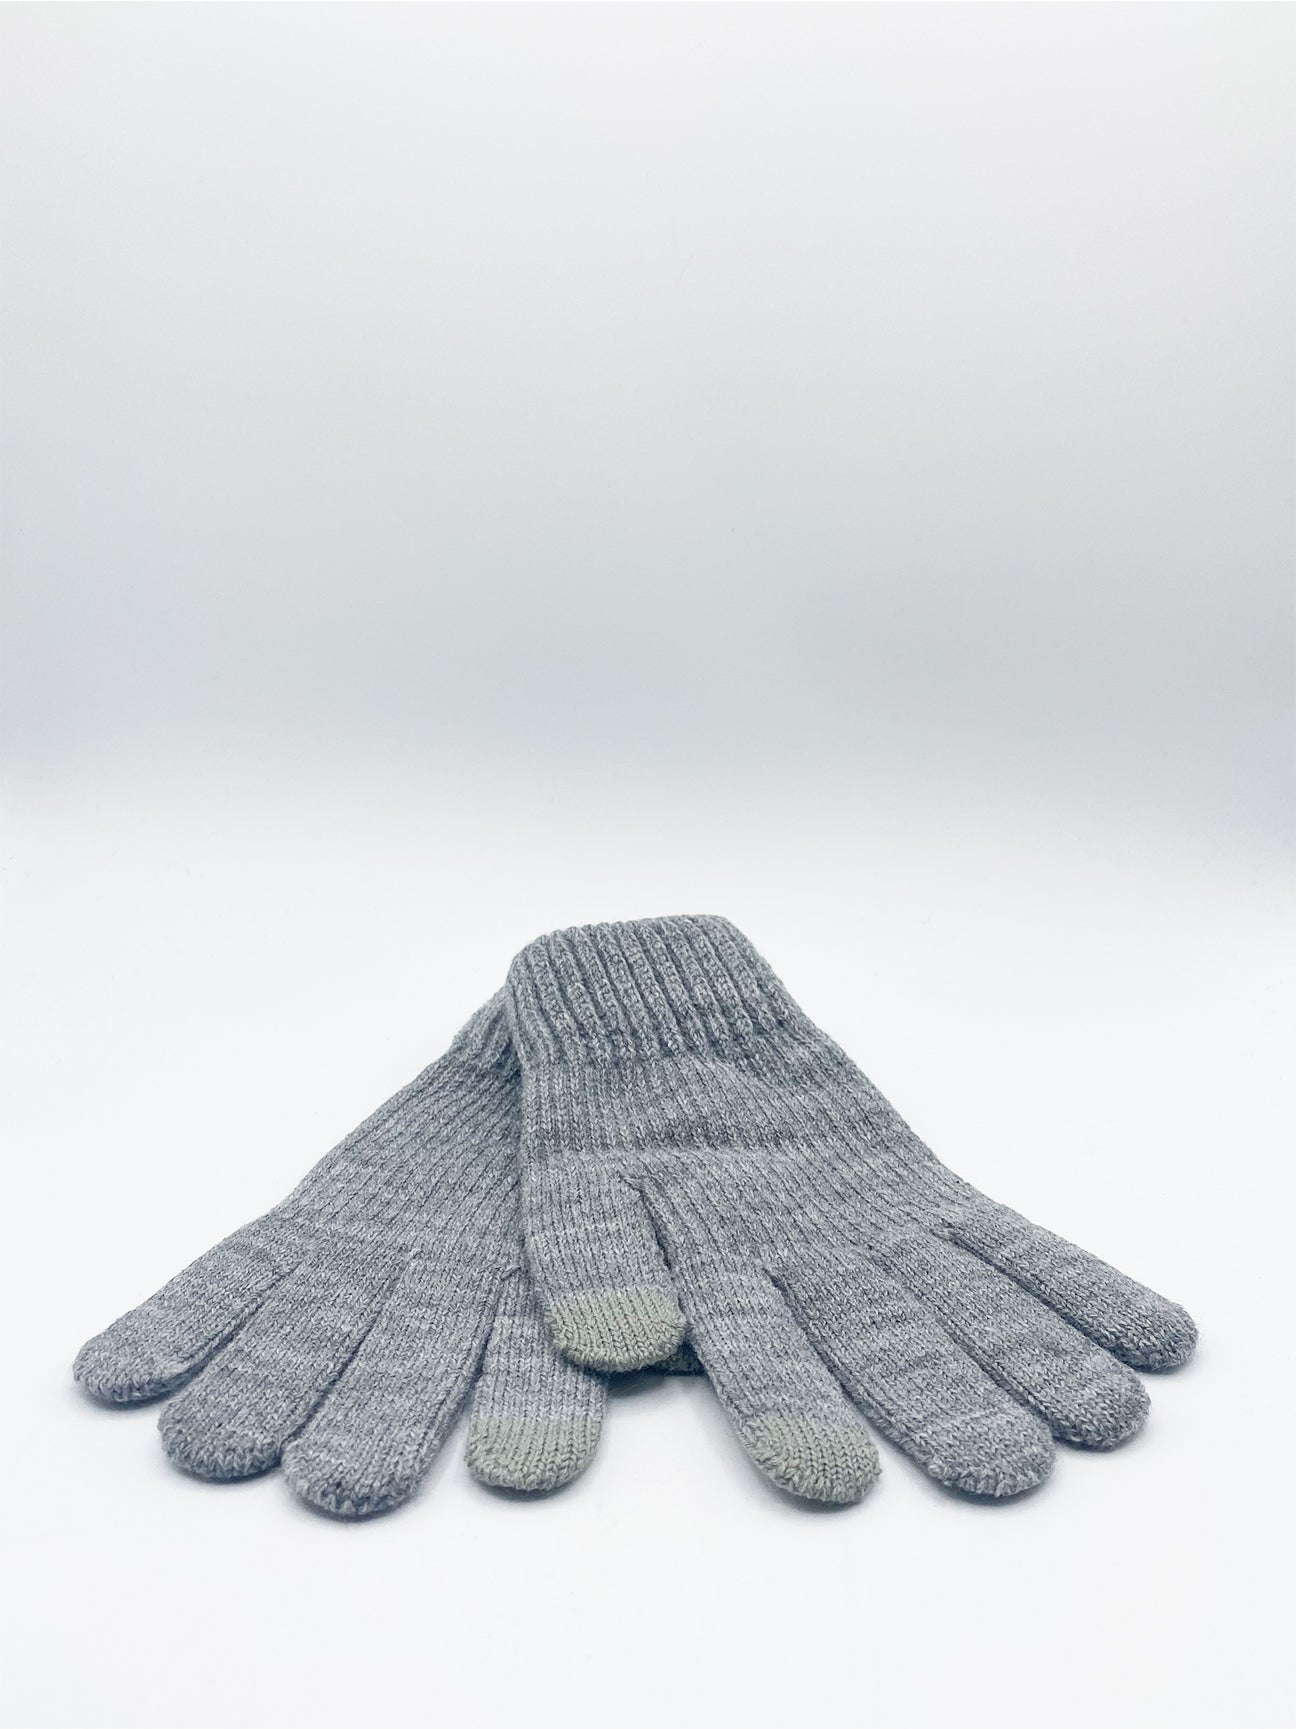 Plain Knitted Gloves in Grey